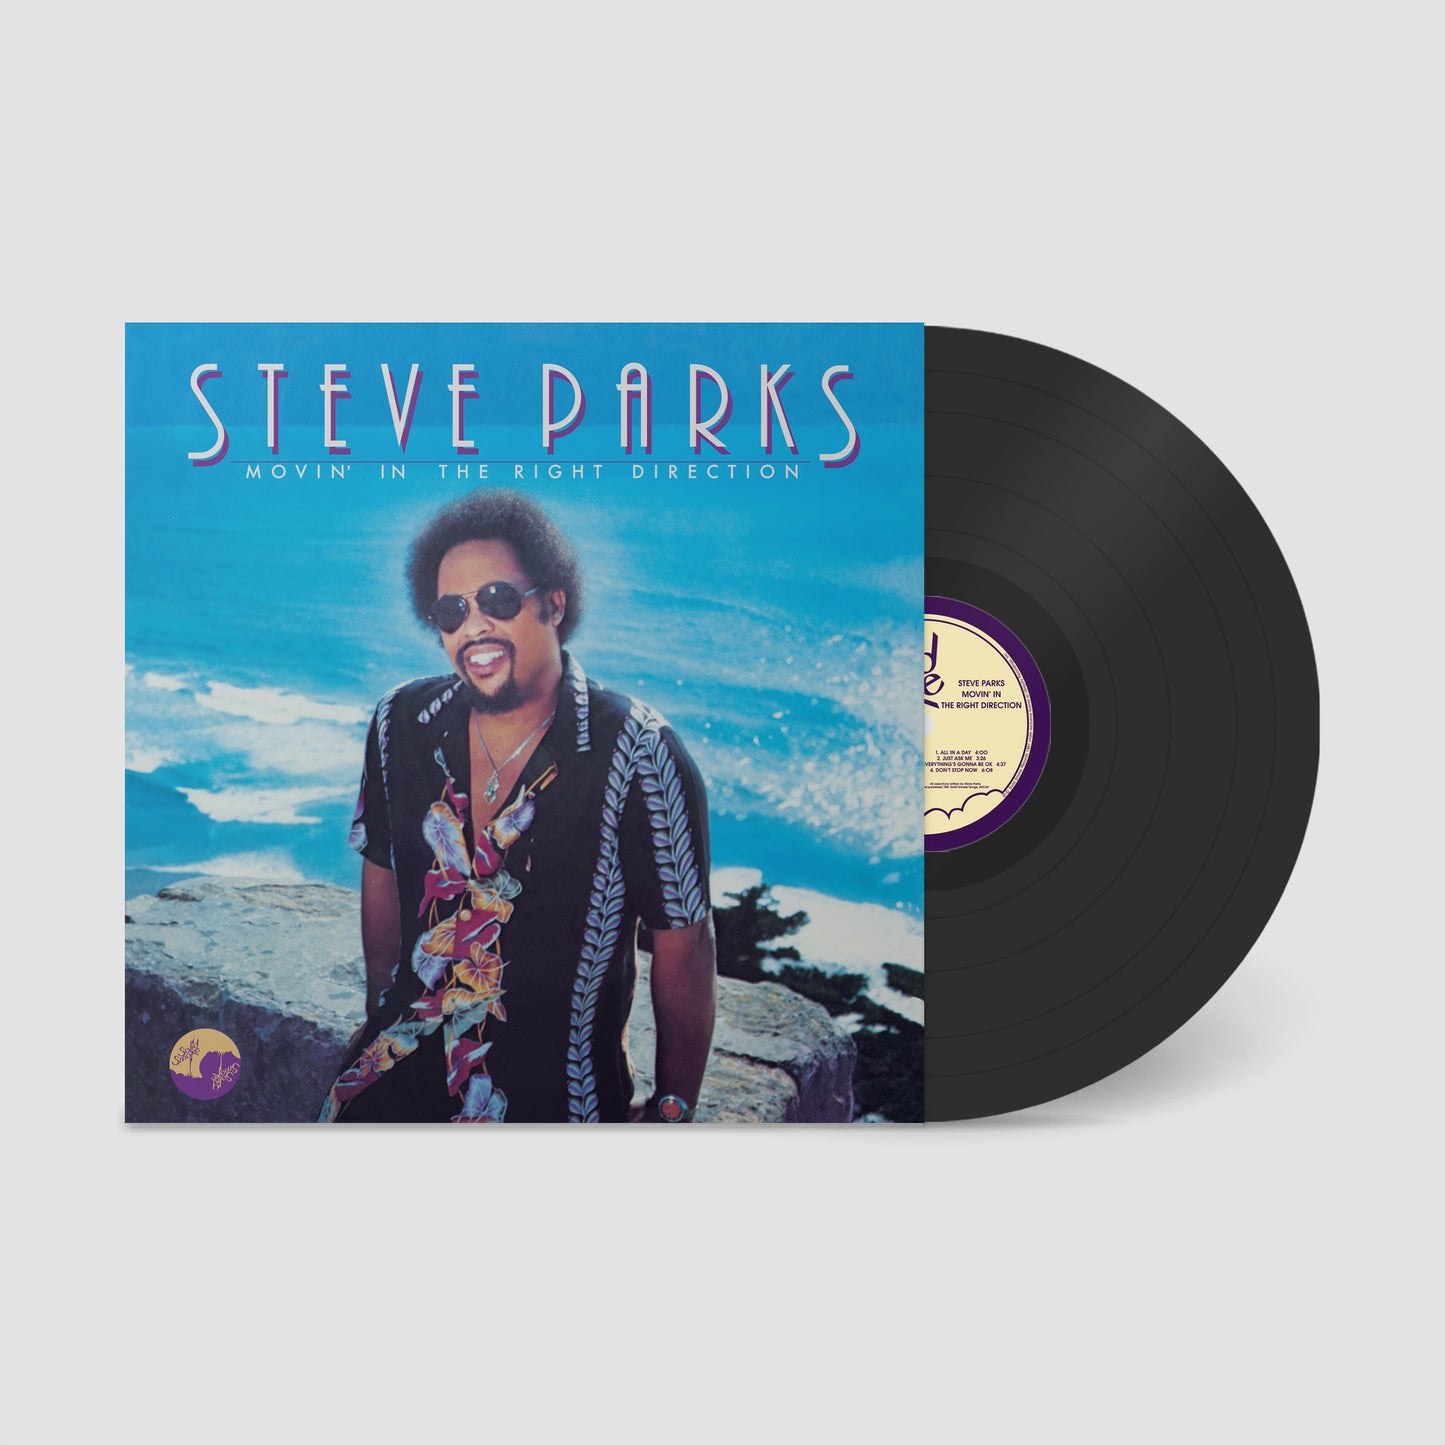 Steve Parks "Movin' In The Right Direction" LP